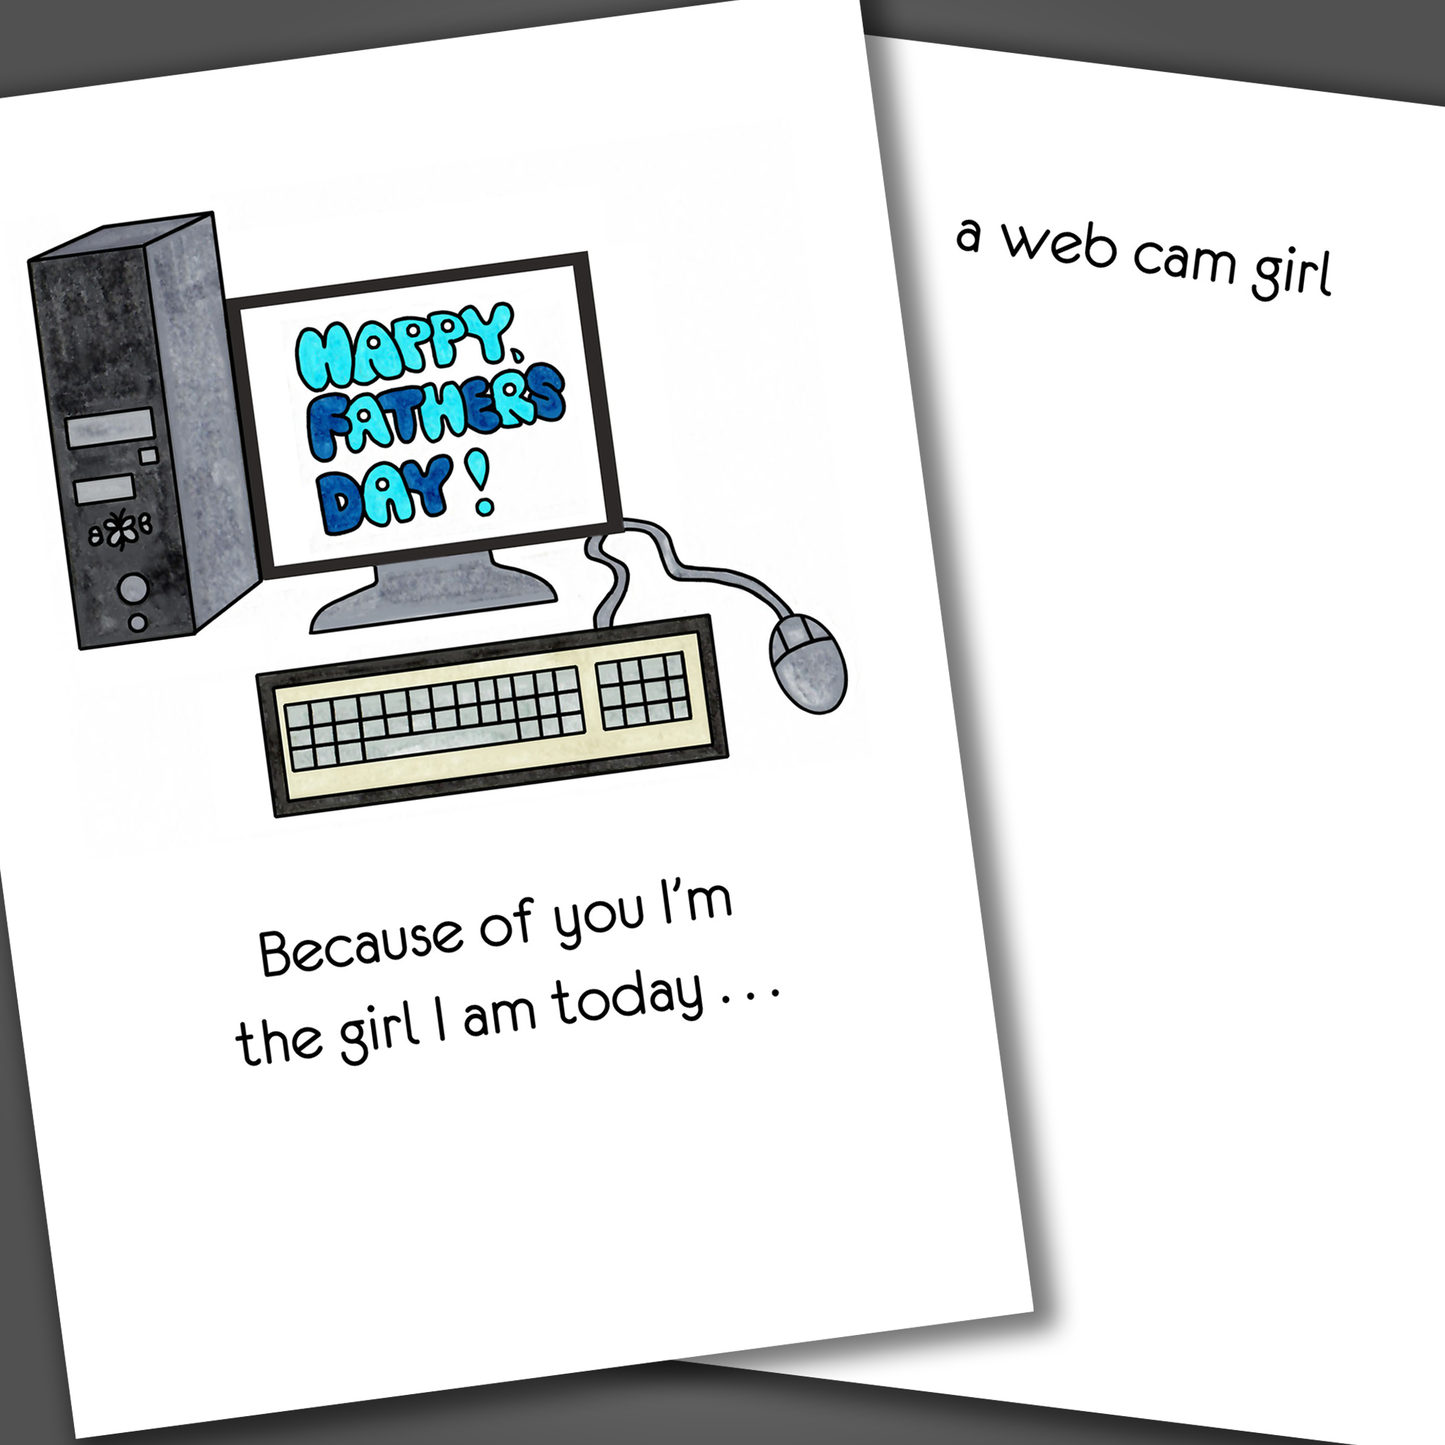 Funny happy father's day card with a computer drawn on the front of the card. Inside the card is a funny joke that says I am a web cam girl because of you dad.